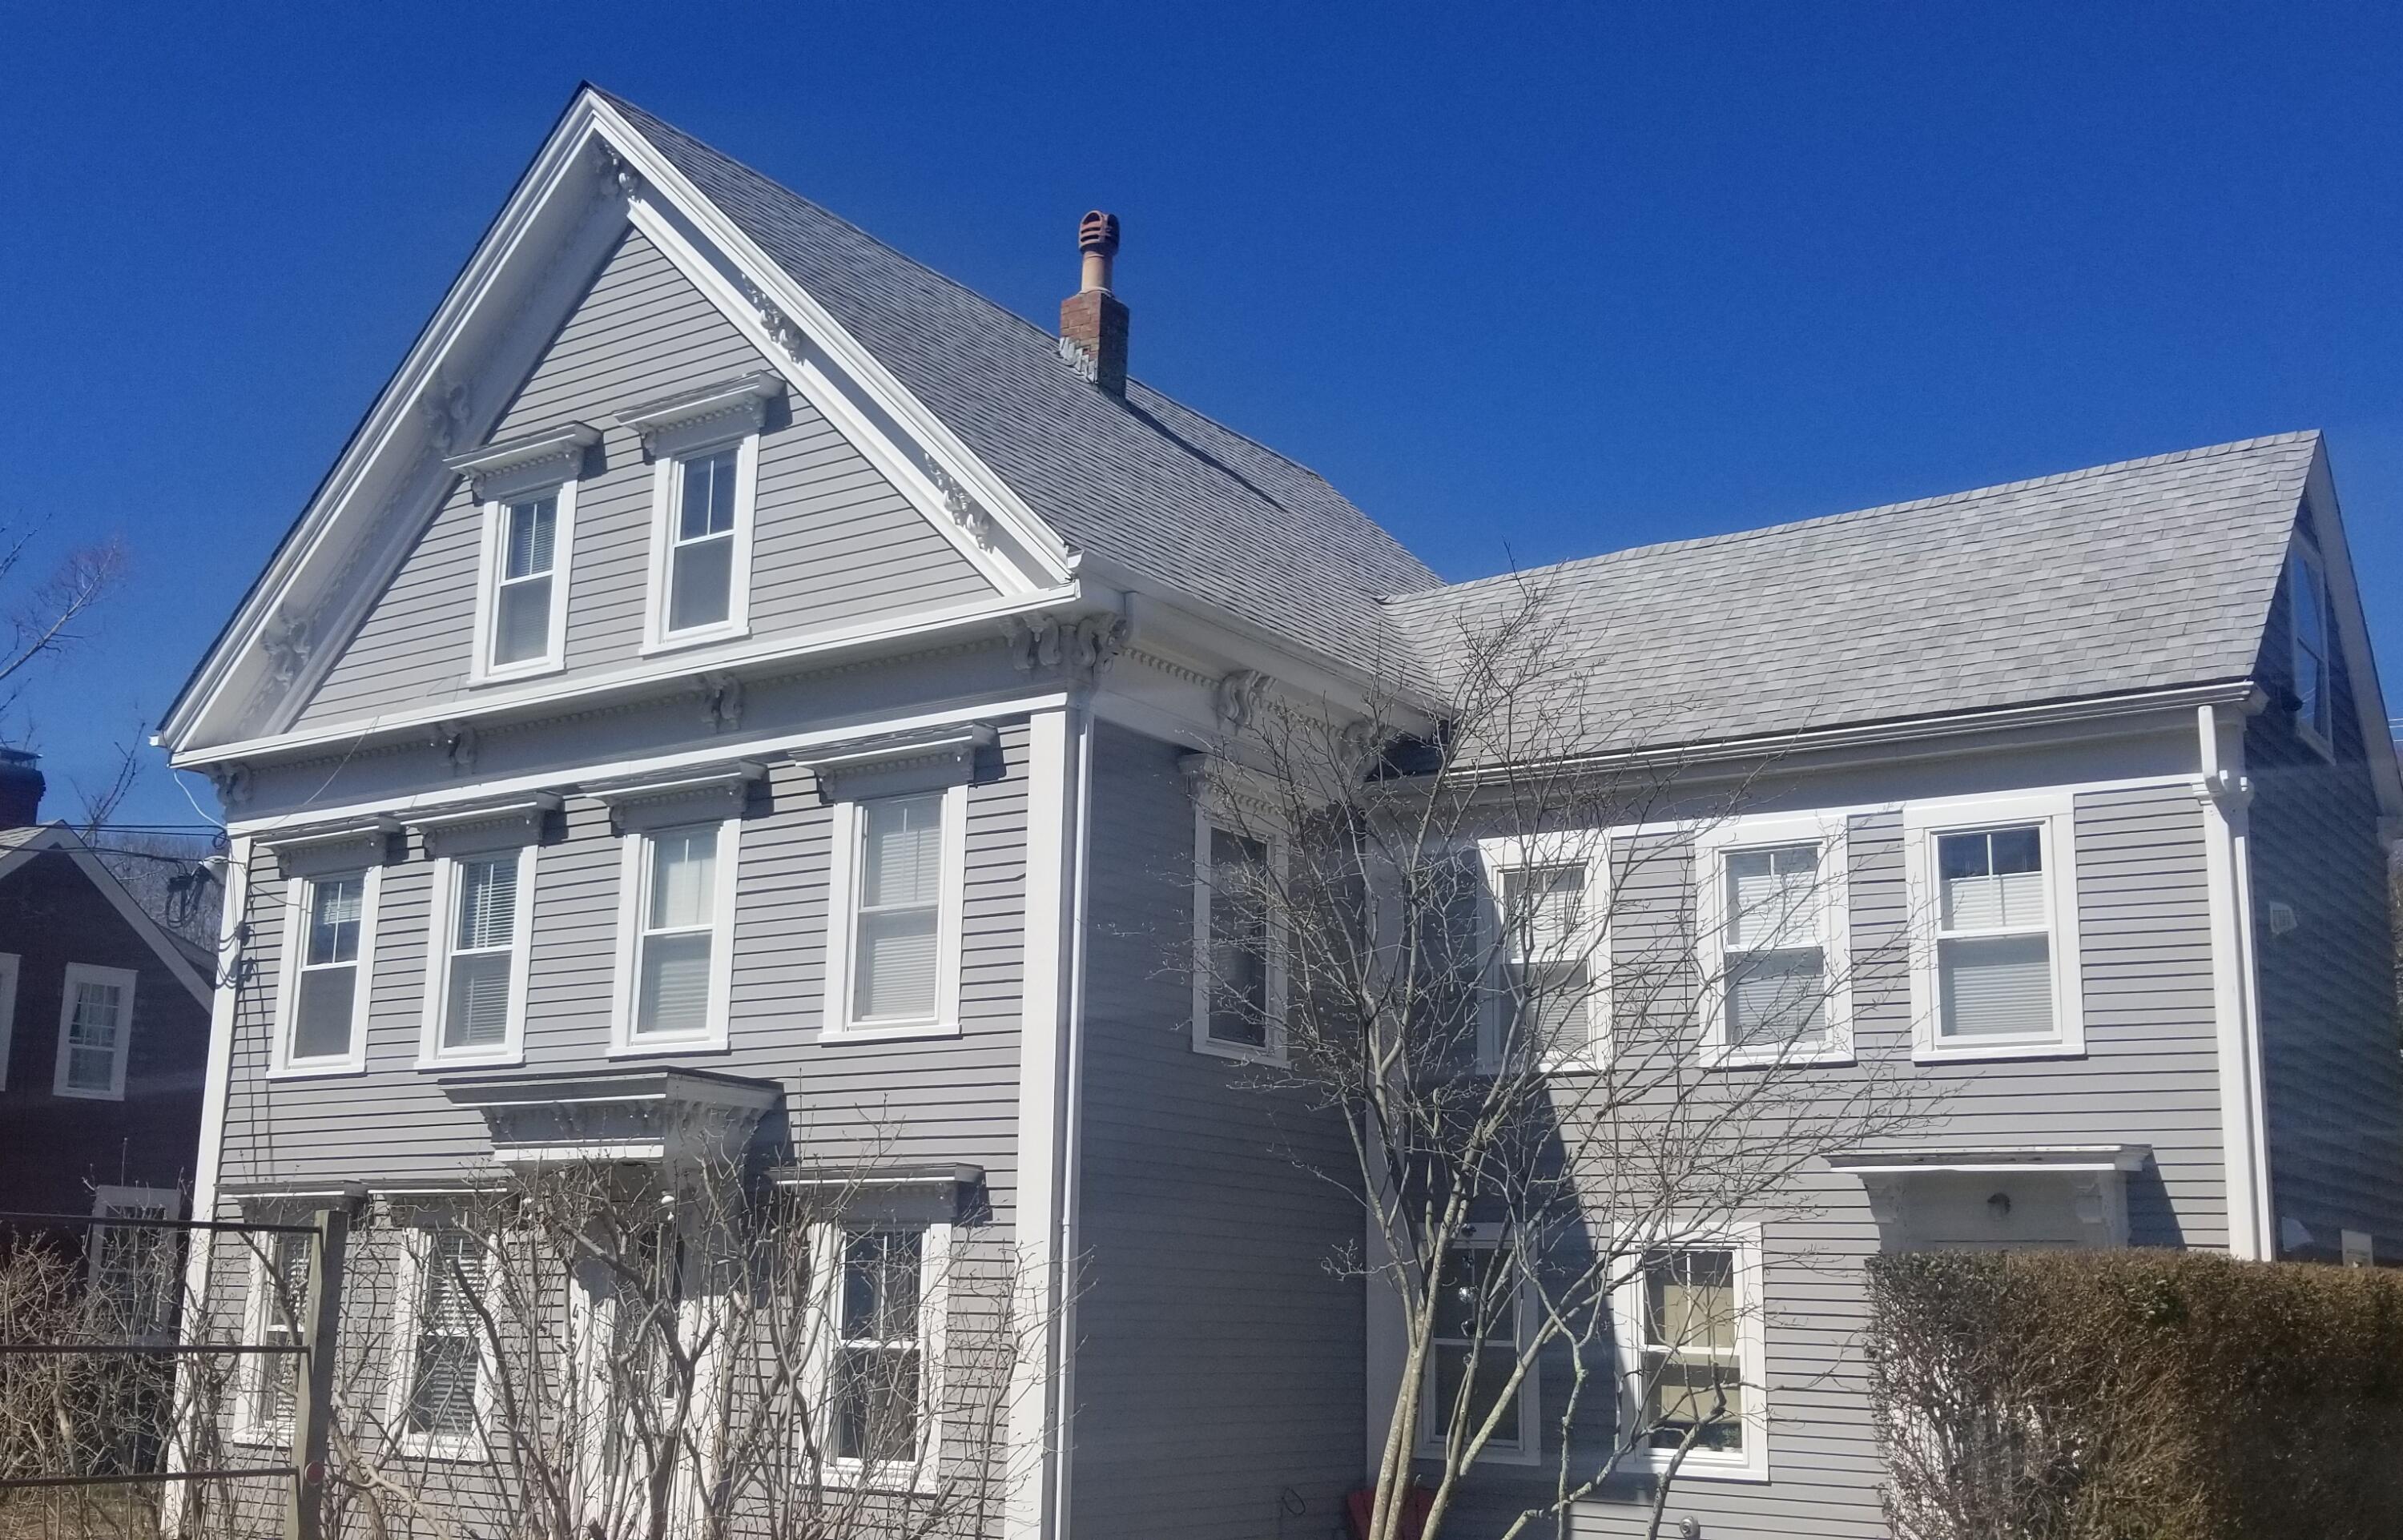 442 Commercial Street # U4, Provincetown, Massachusetts 02657, 3 Bedrooms Bedrooms, 5 Rooms Rooms,1 BathroomBathrooms,Residential,For Sale,Other,442 Commercial Street # U4,22401364